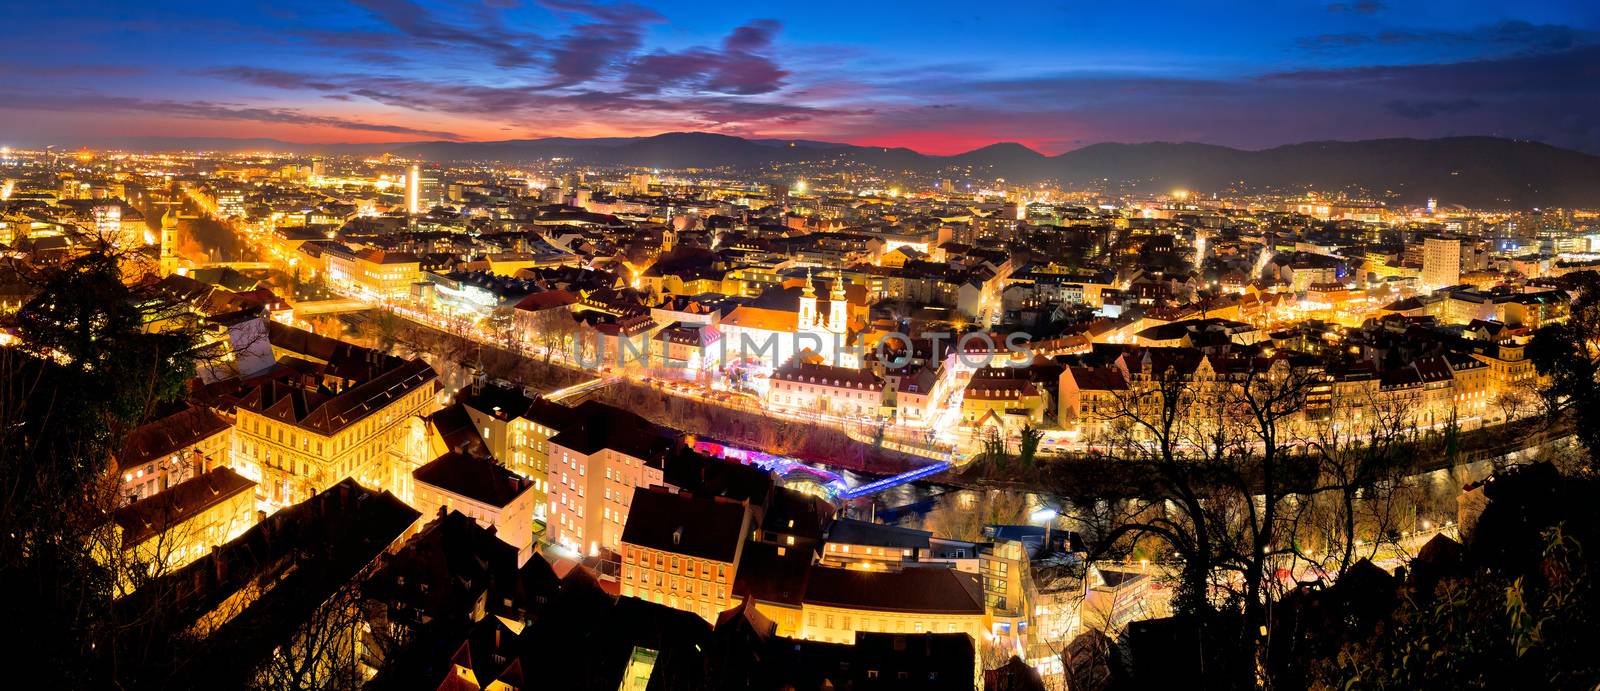 Graz aerial night panoramic view from Schlossberg by xbrchx